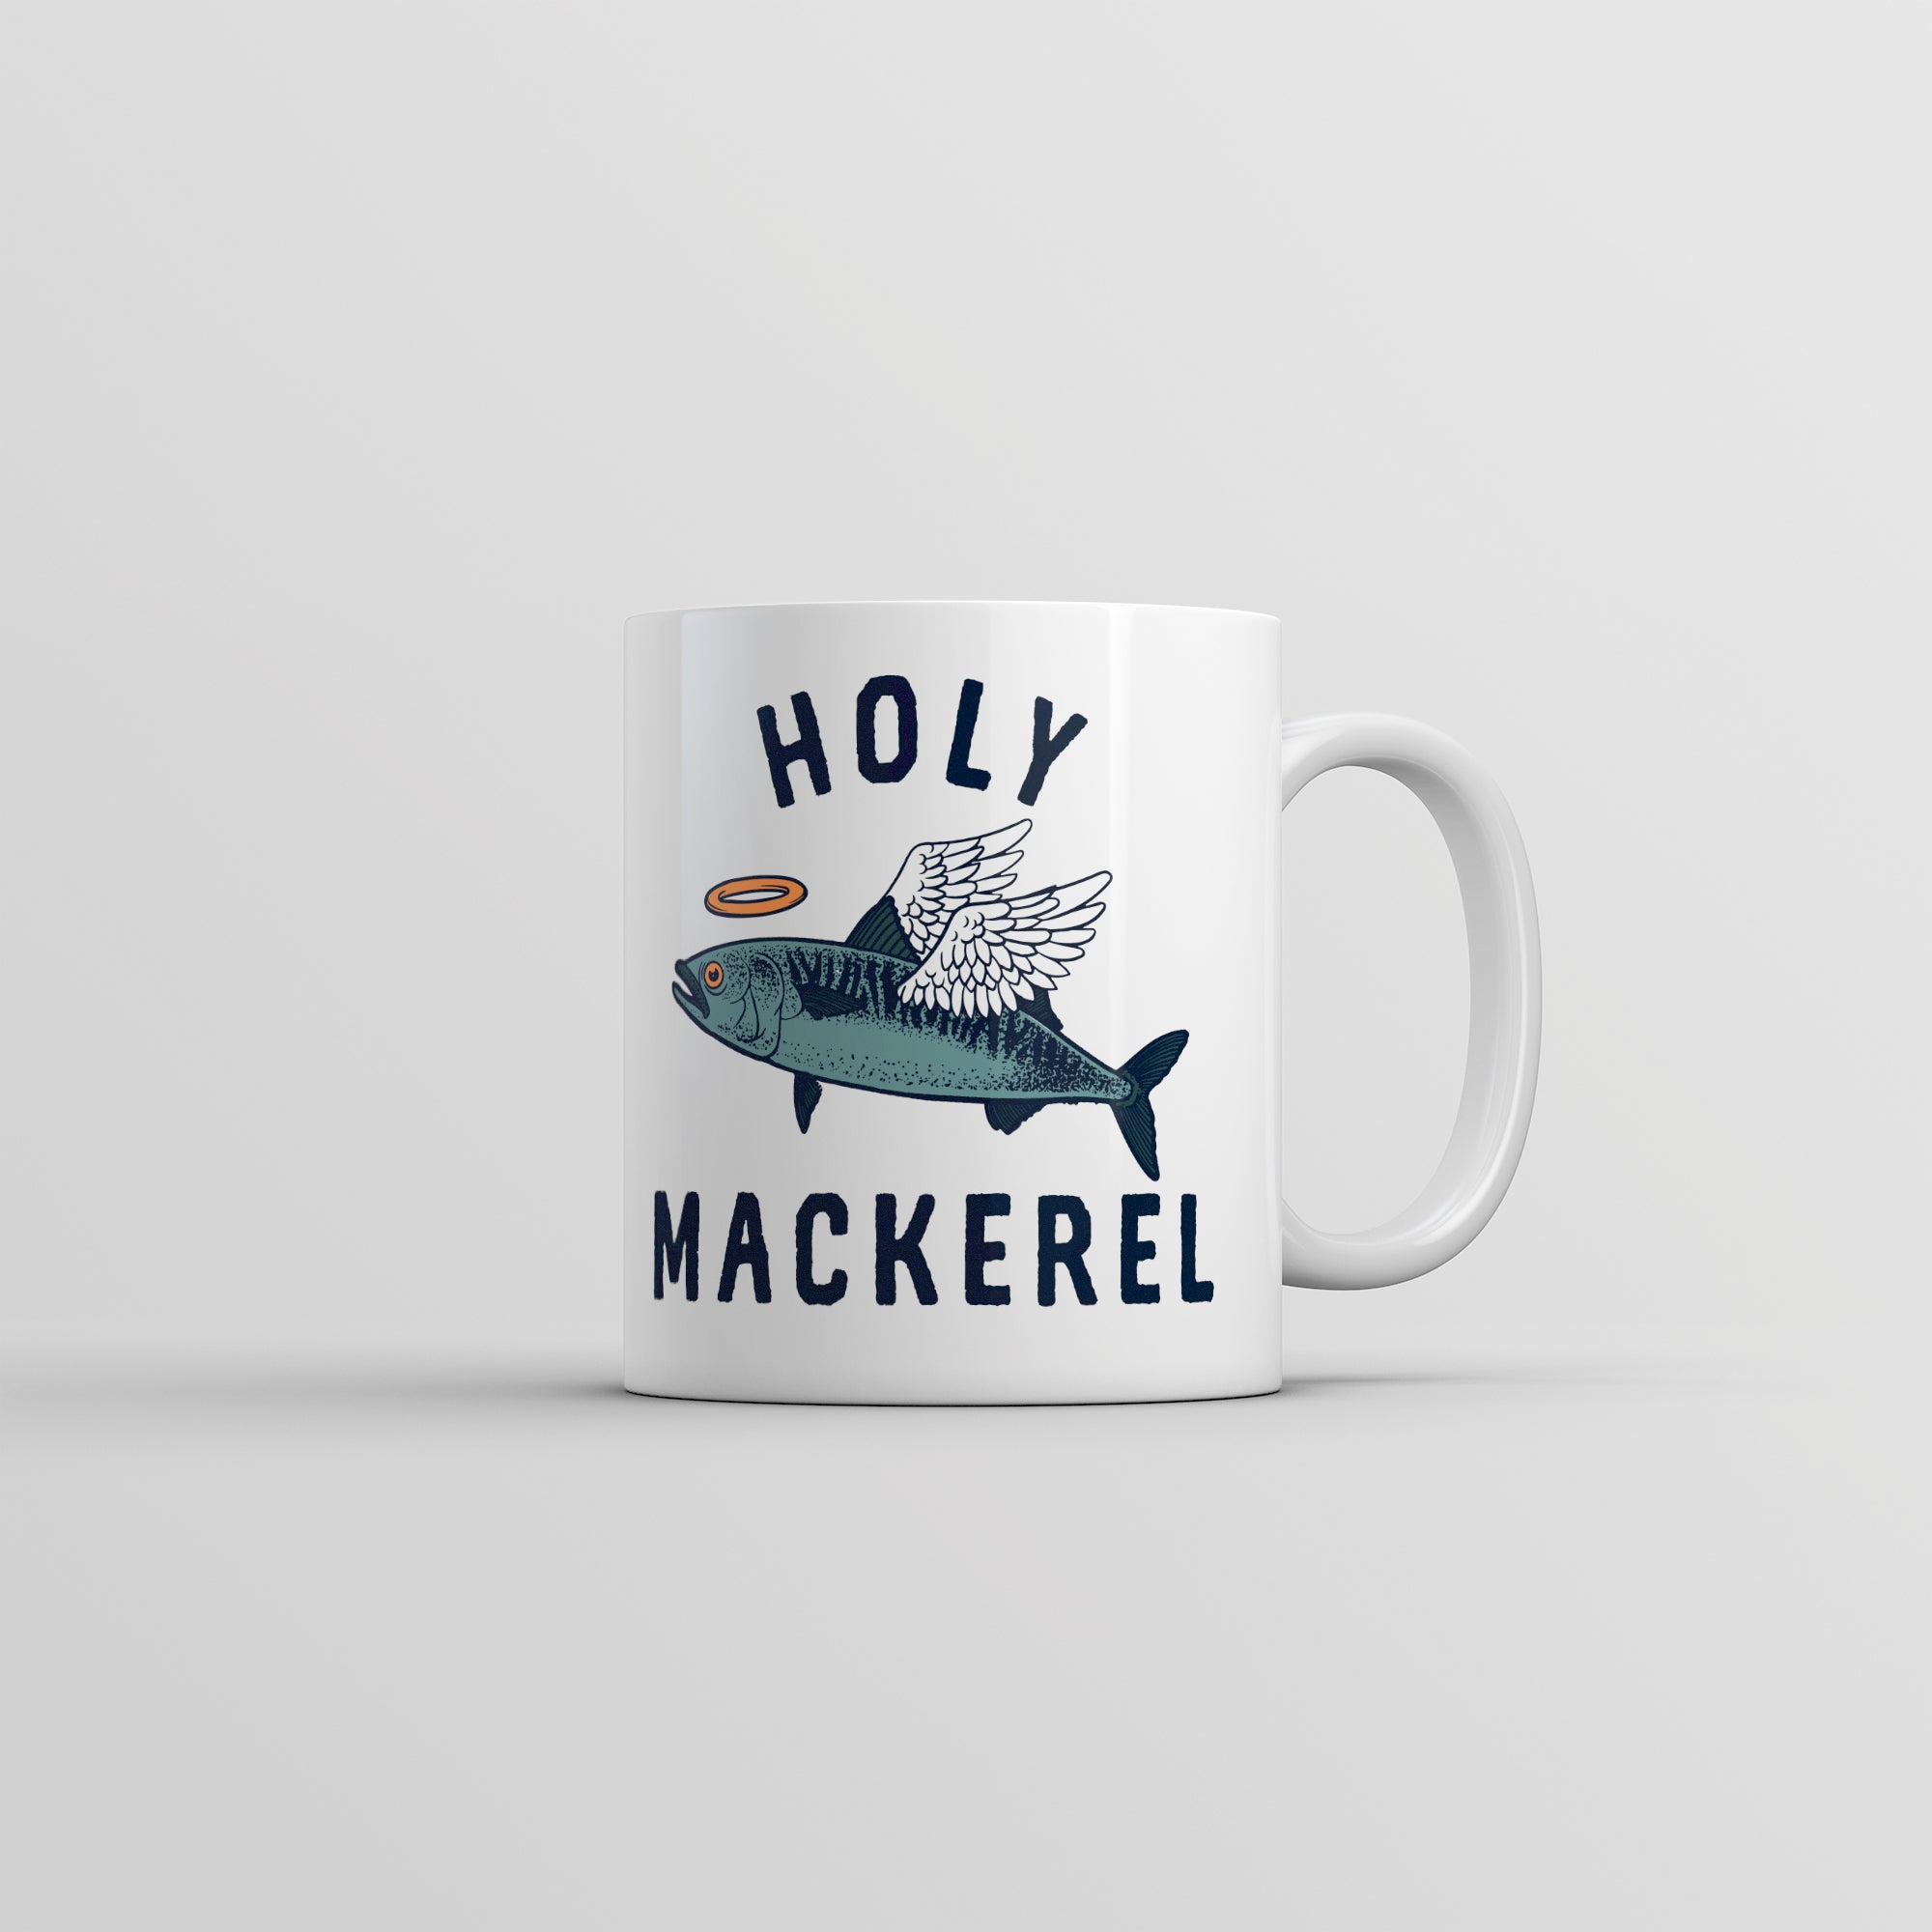 Fishing Gifts For Men _ Funny Fishing Mug _ Tea Coffee Mug Presents For  Fisherman _ Father's Day Birthday Gifts For Him _ In My Head, Ceramic  Novelty Coffee Mug, Tea Cup